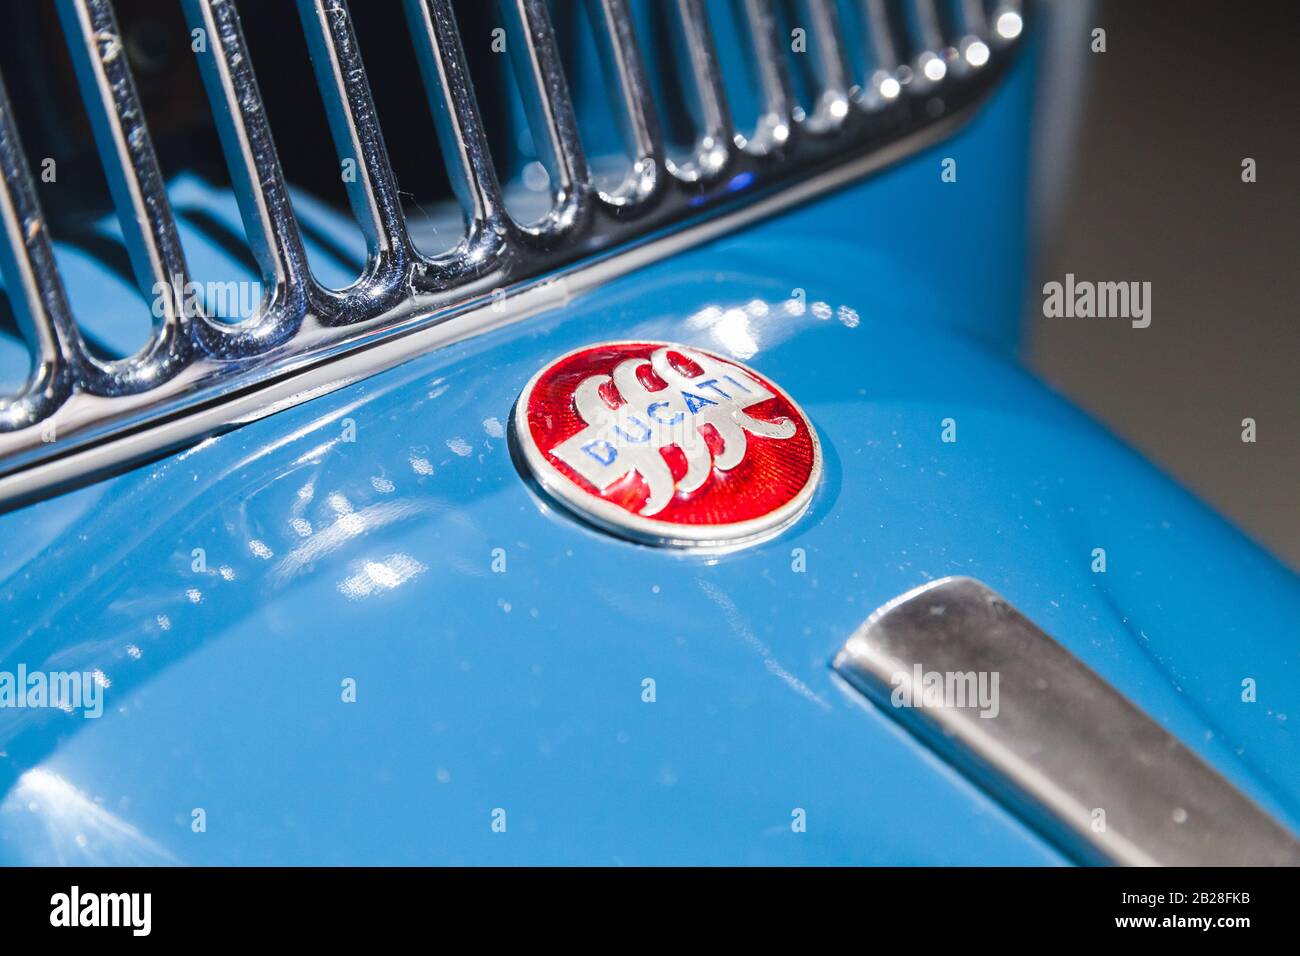 St.Petersburg, Russia - April 3, 2019: Round red Ducati sign is on Ducati cruiser 175, vintage blue scooter fragment Stock Photo